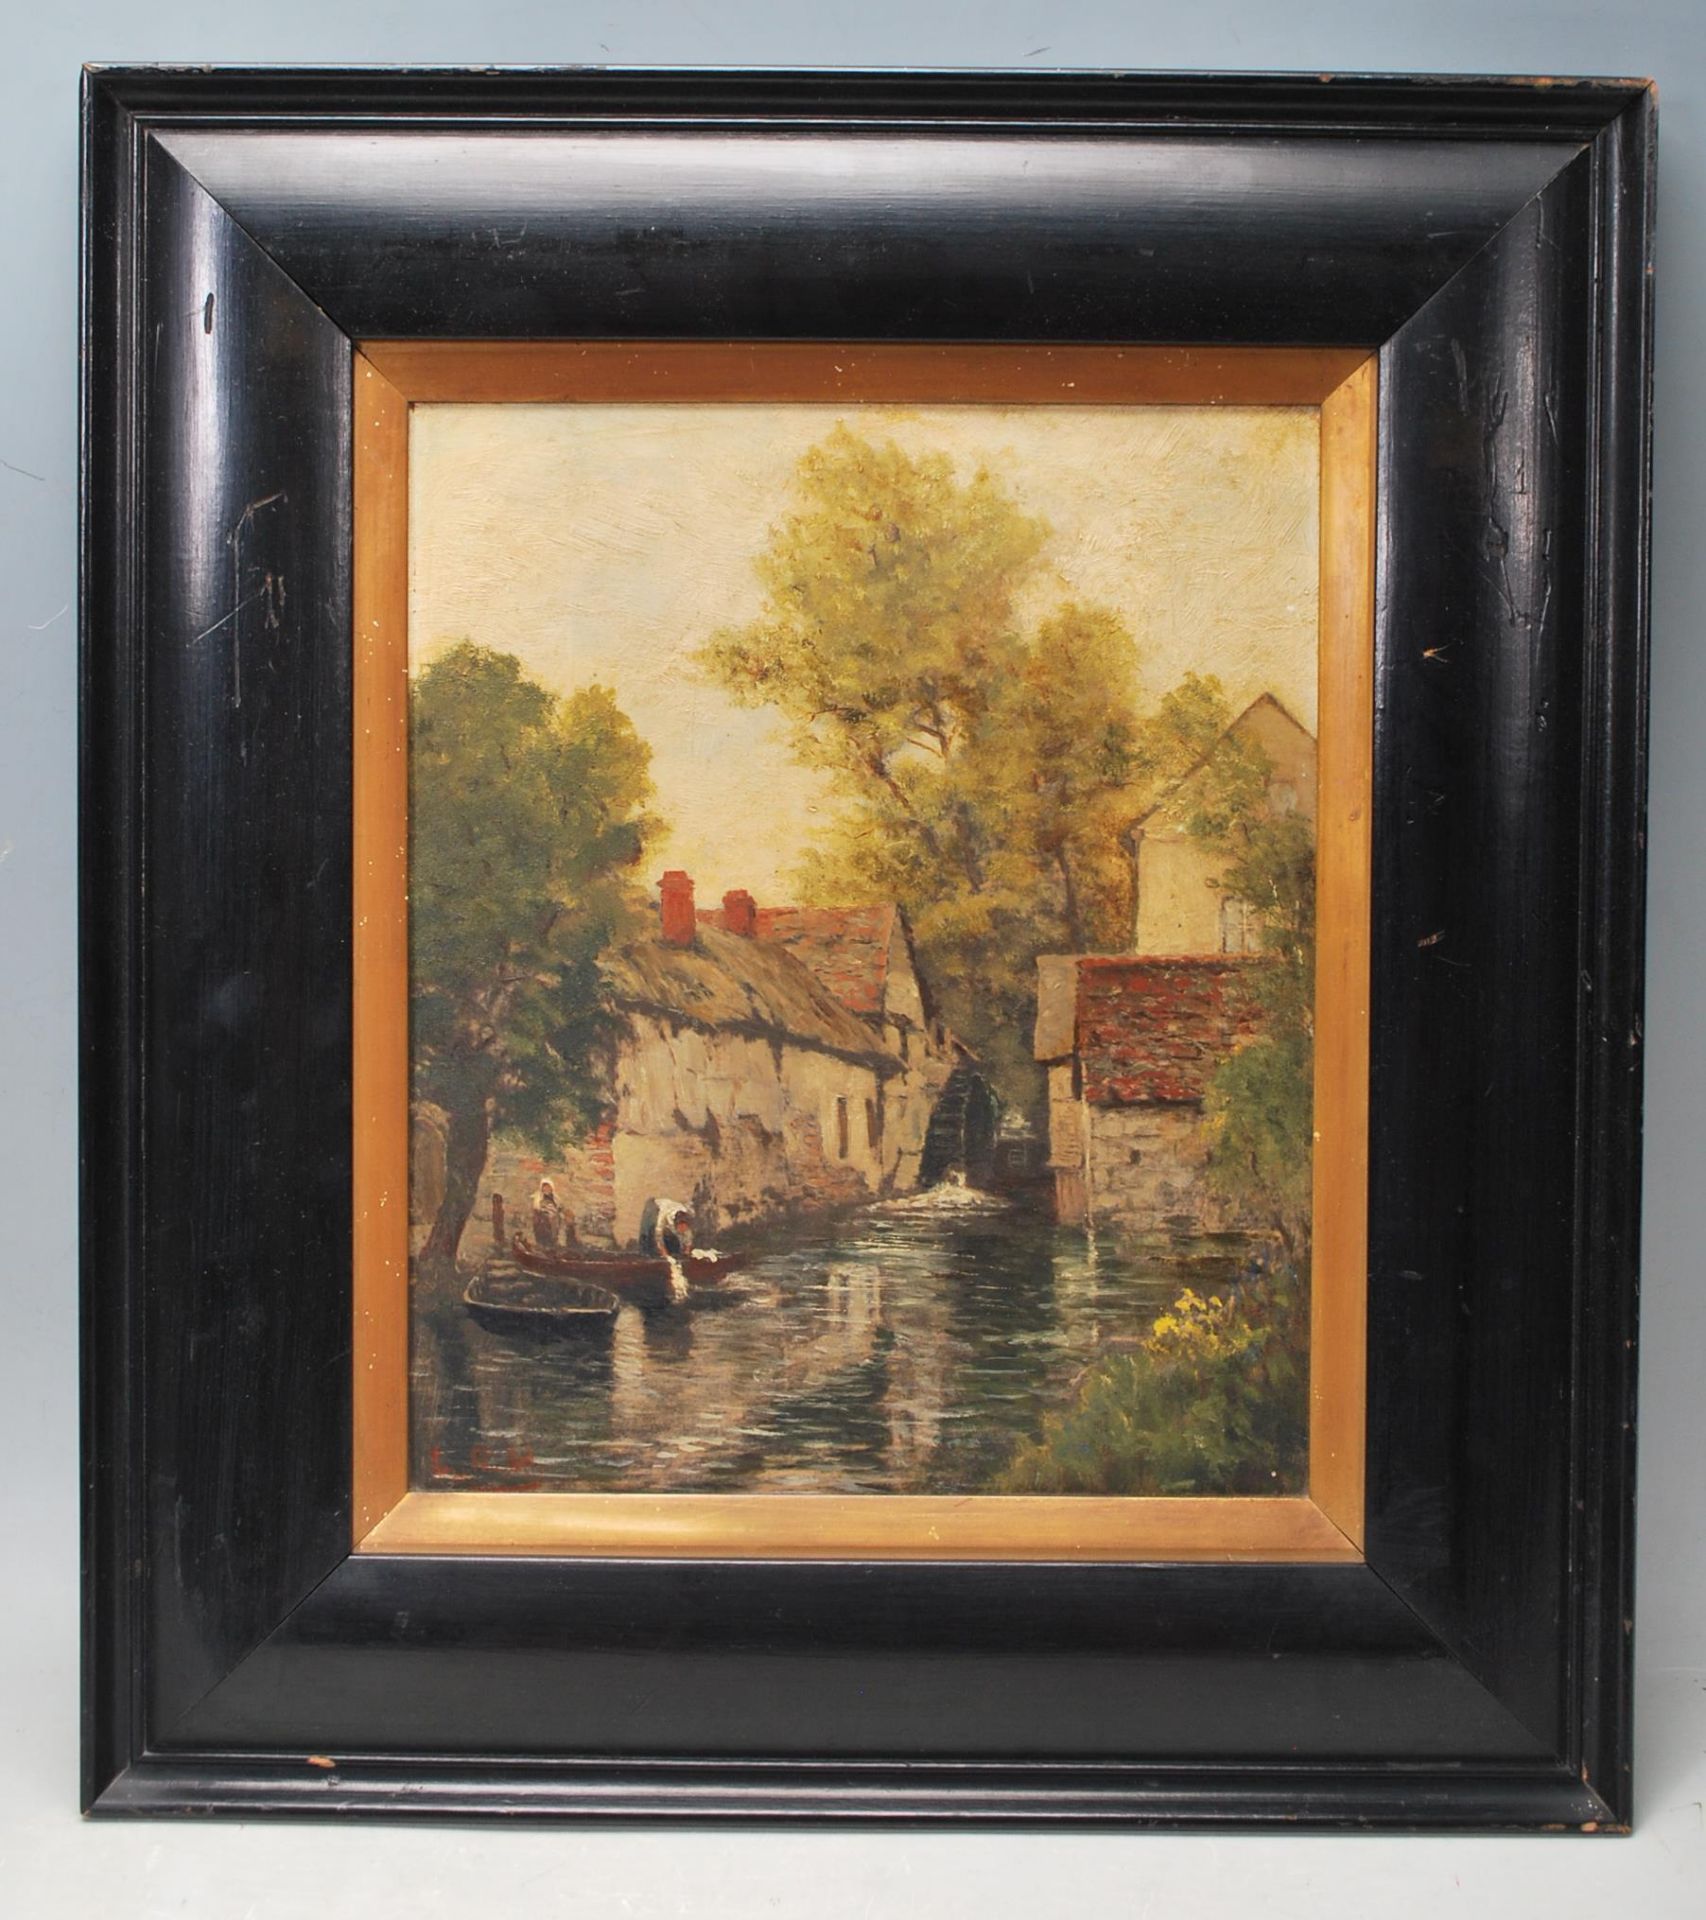 ANTIQUE OIL ON BOARD PAINTING DEPICTING A MILL